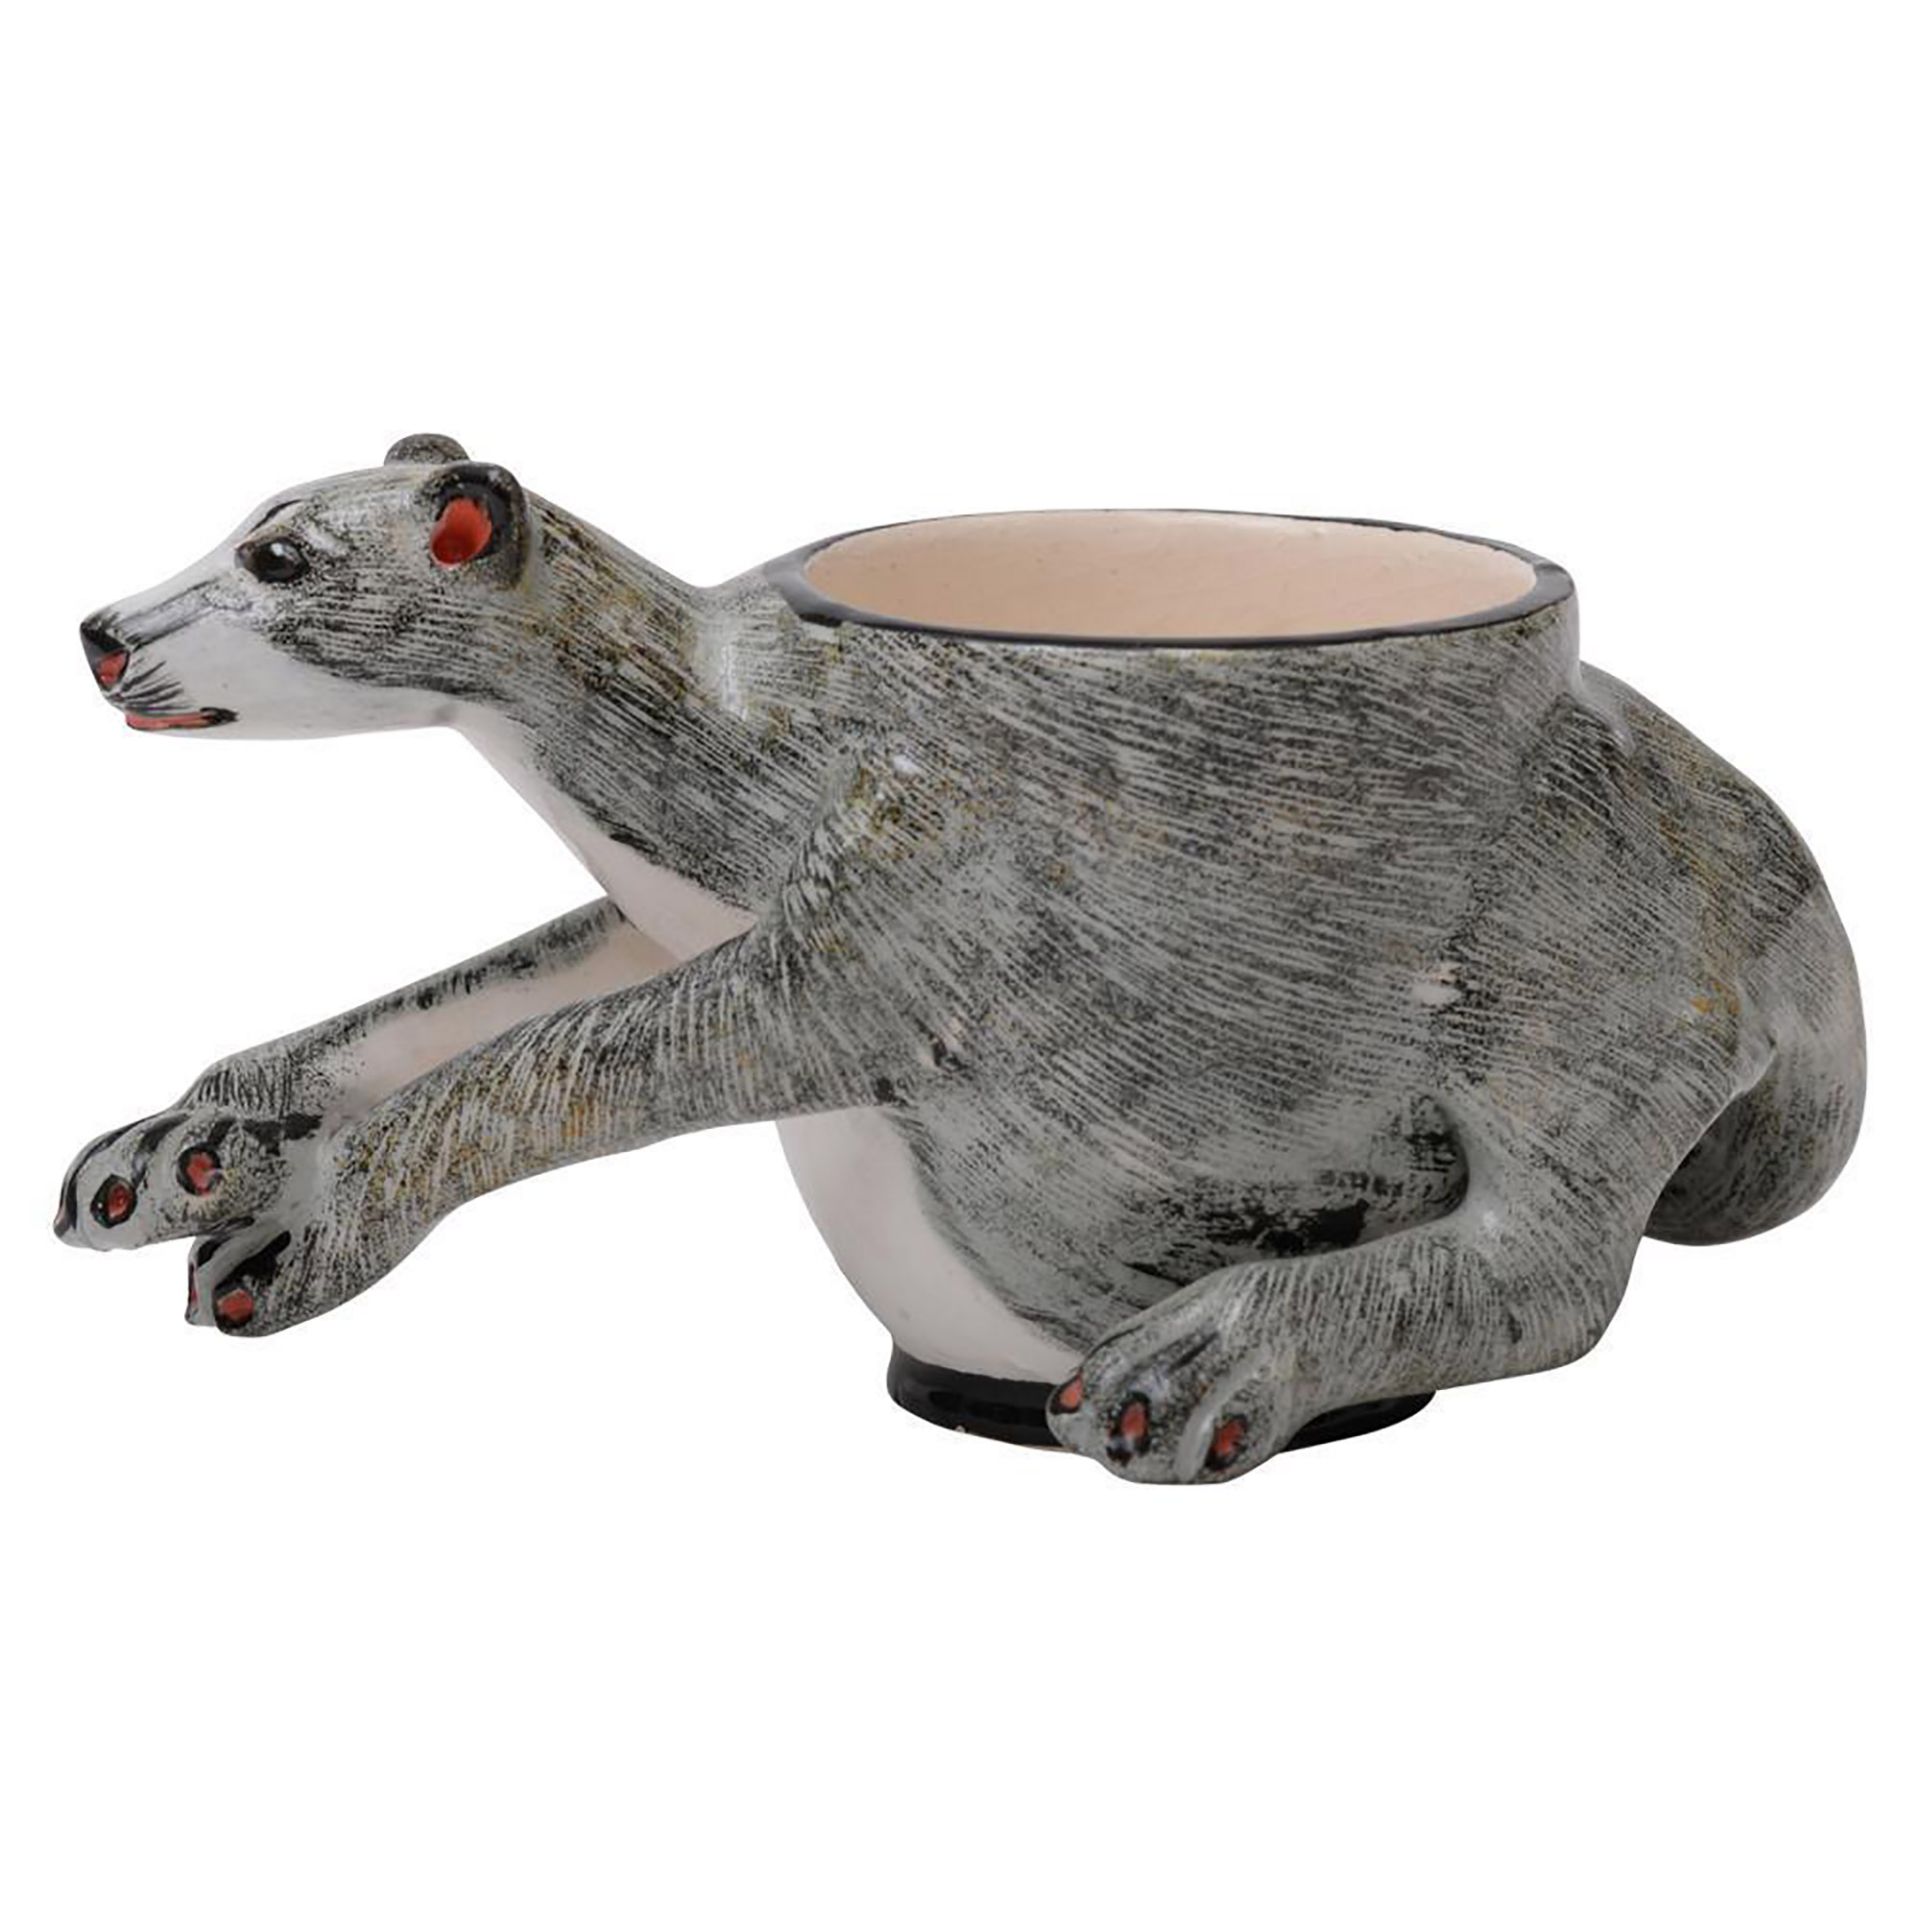 Mongoose Egg Cup by Ardmore Ceramics - Image 2 of 4